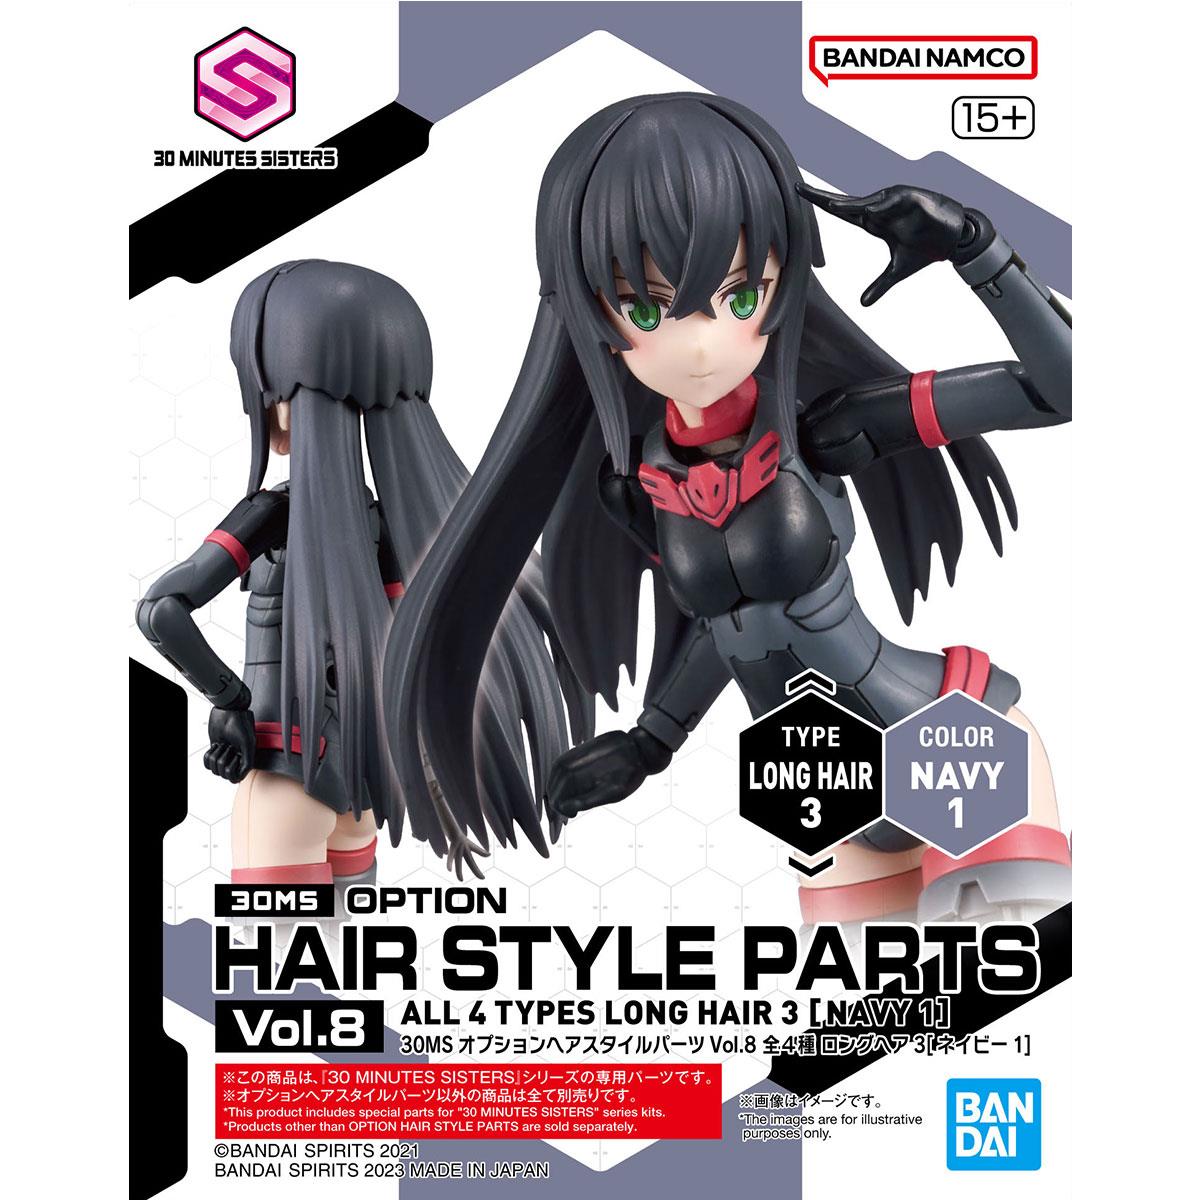 30 Minutes Sisters: Option Hair Style Parts Vol. 8 Model Option Packs